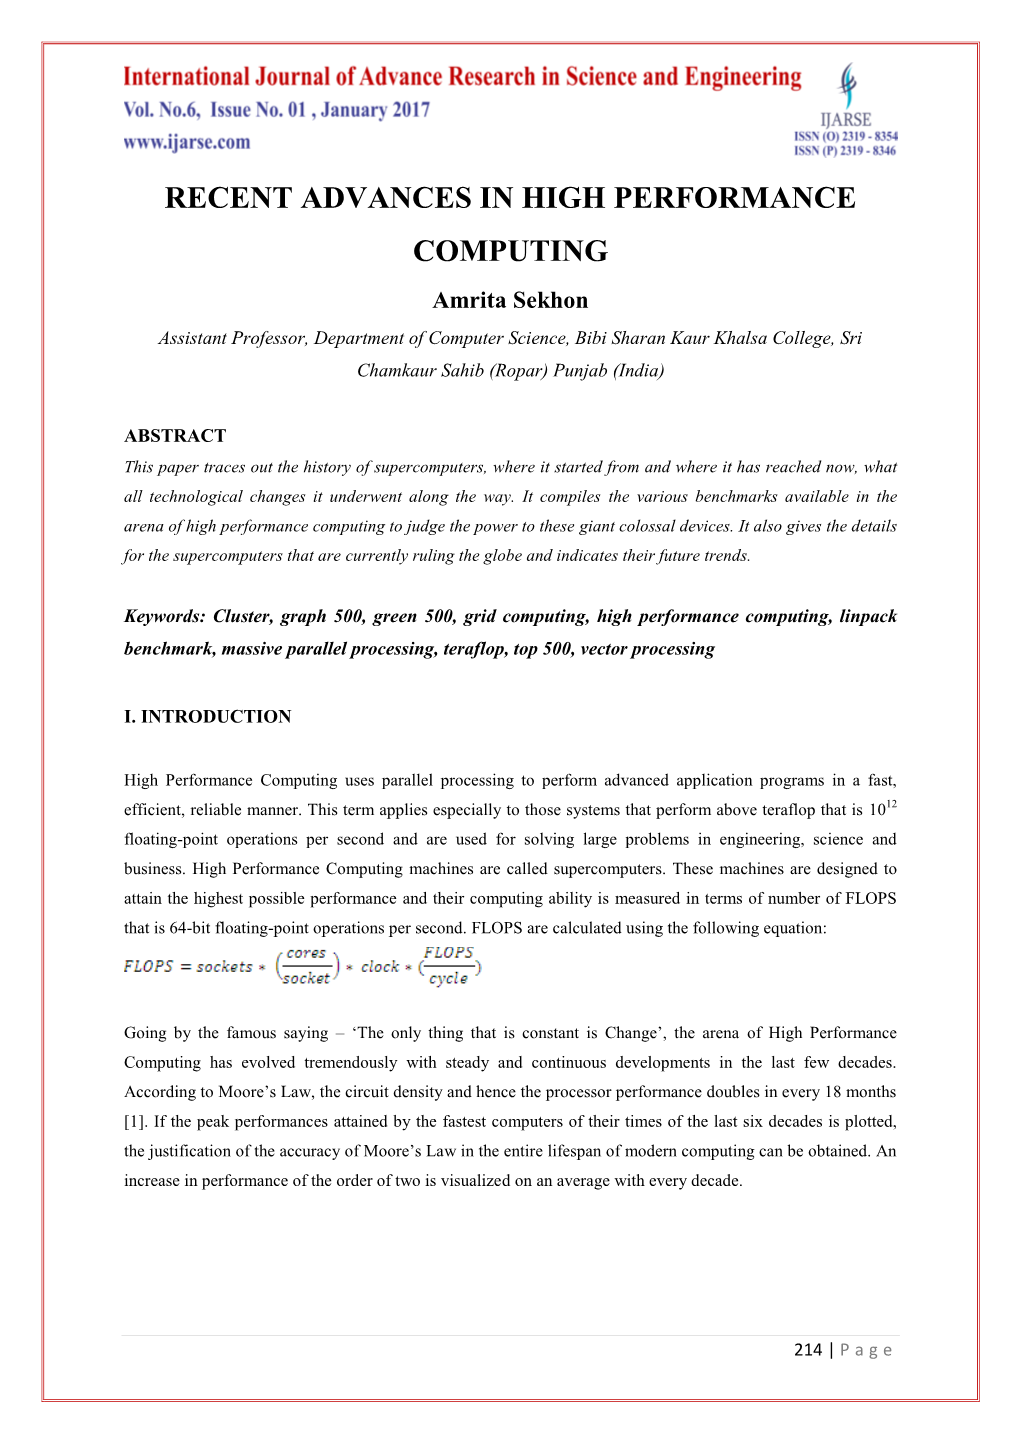 Recent Advances in High Performance Computing